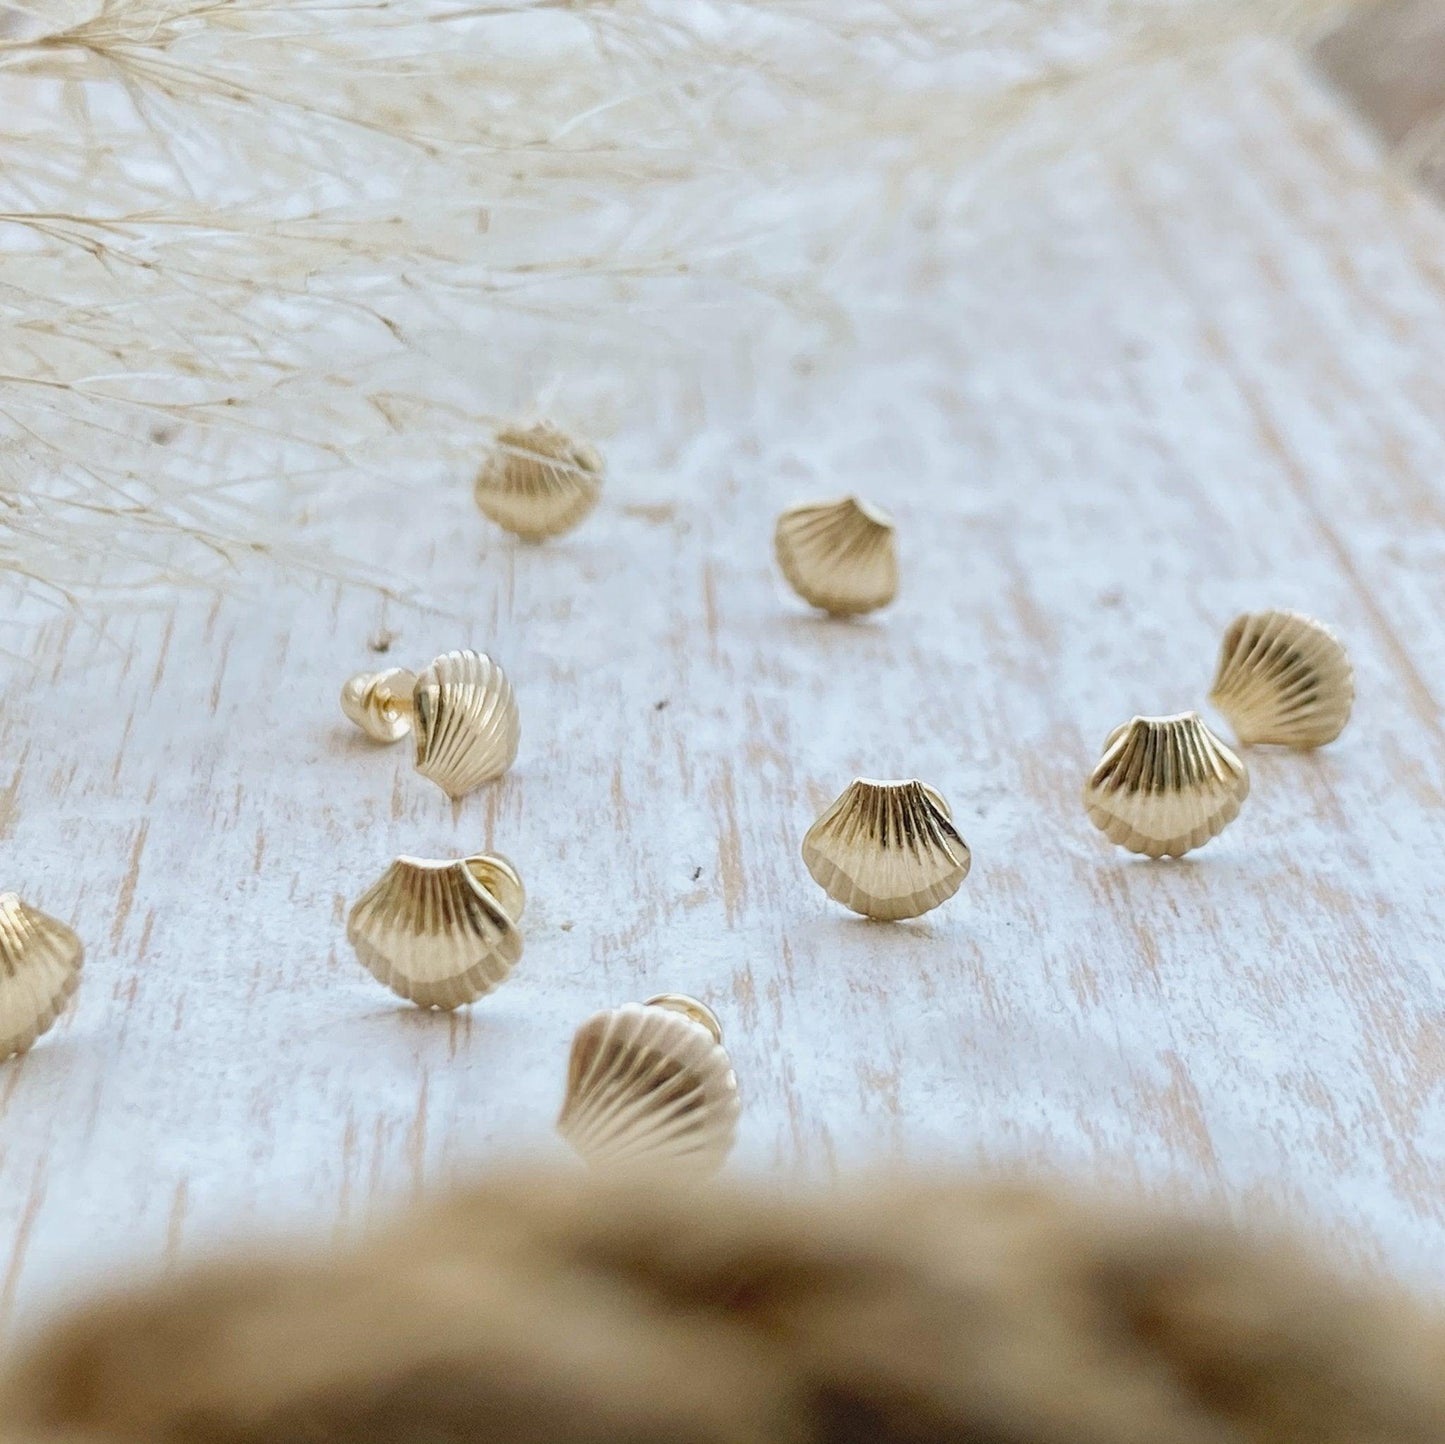 These beautiful Gold seashell stud earrings are crafted from 10k solid gold. These earrings are the perfect gift for yourself or a loved one!